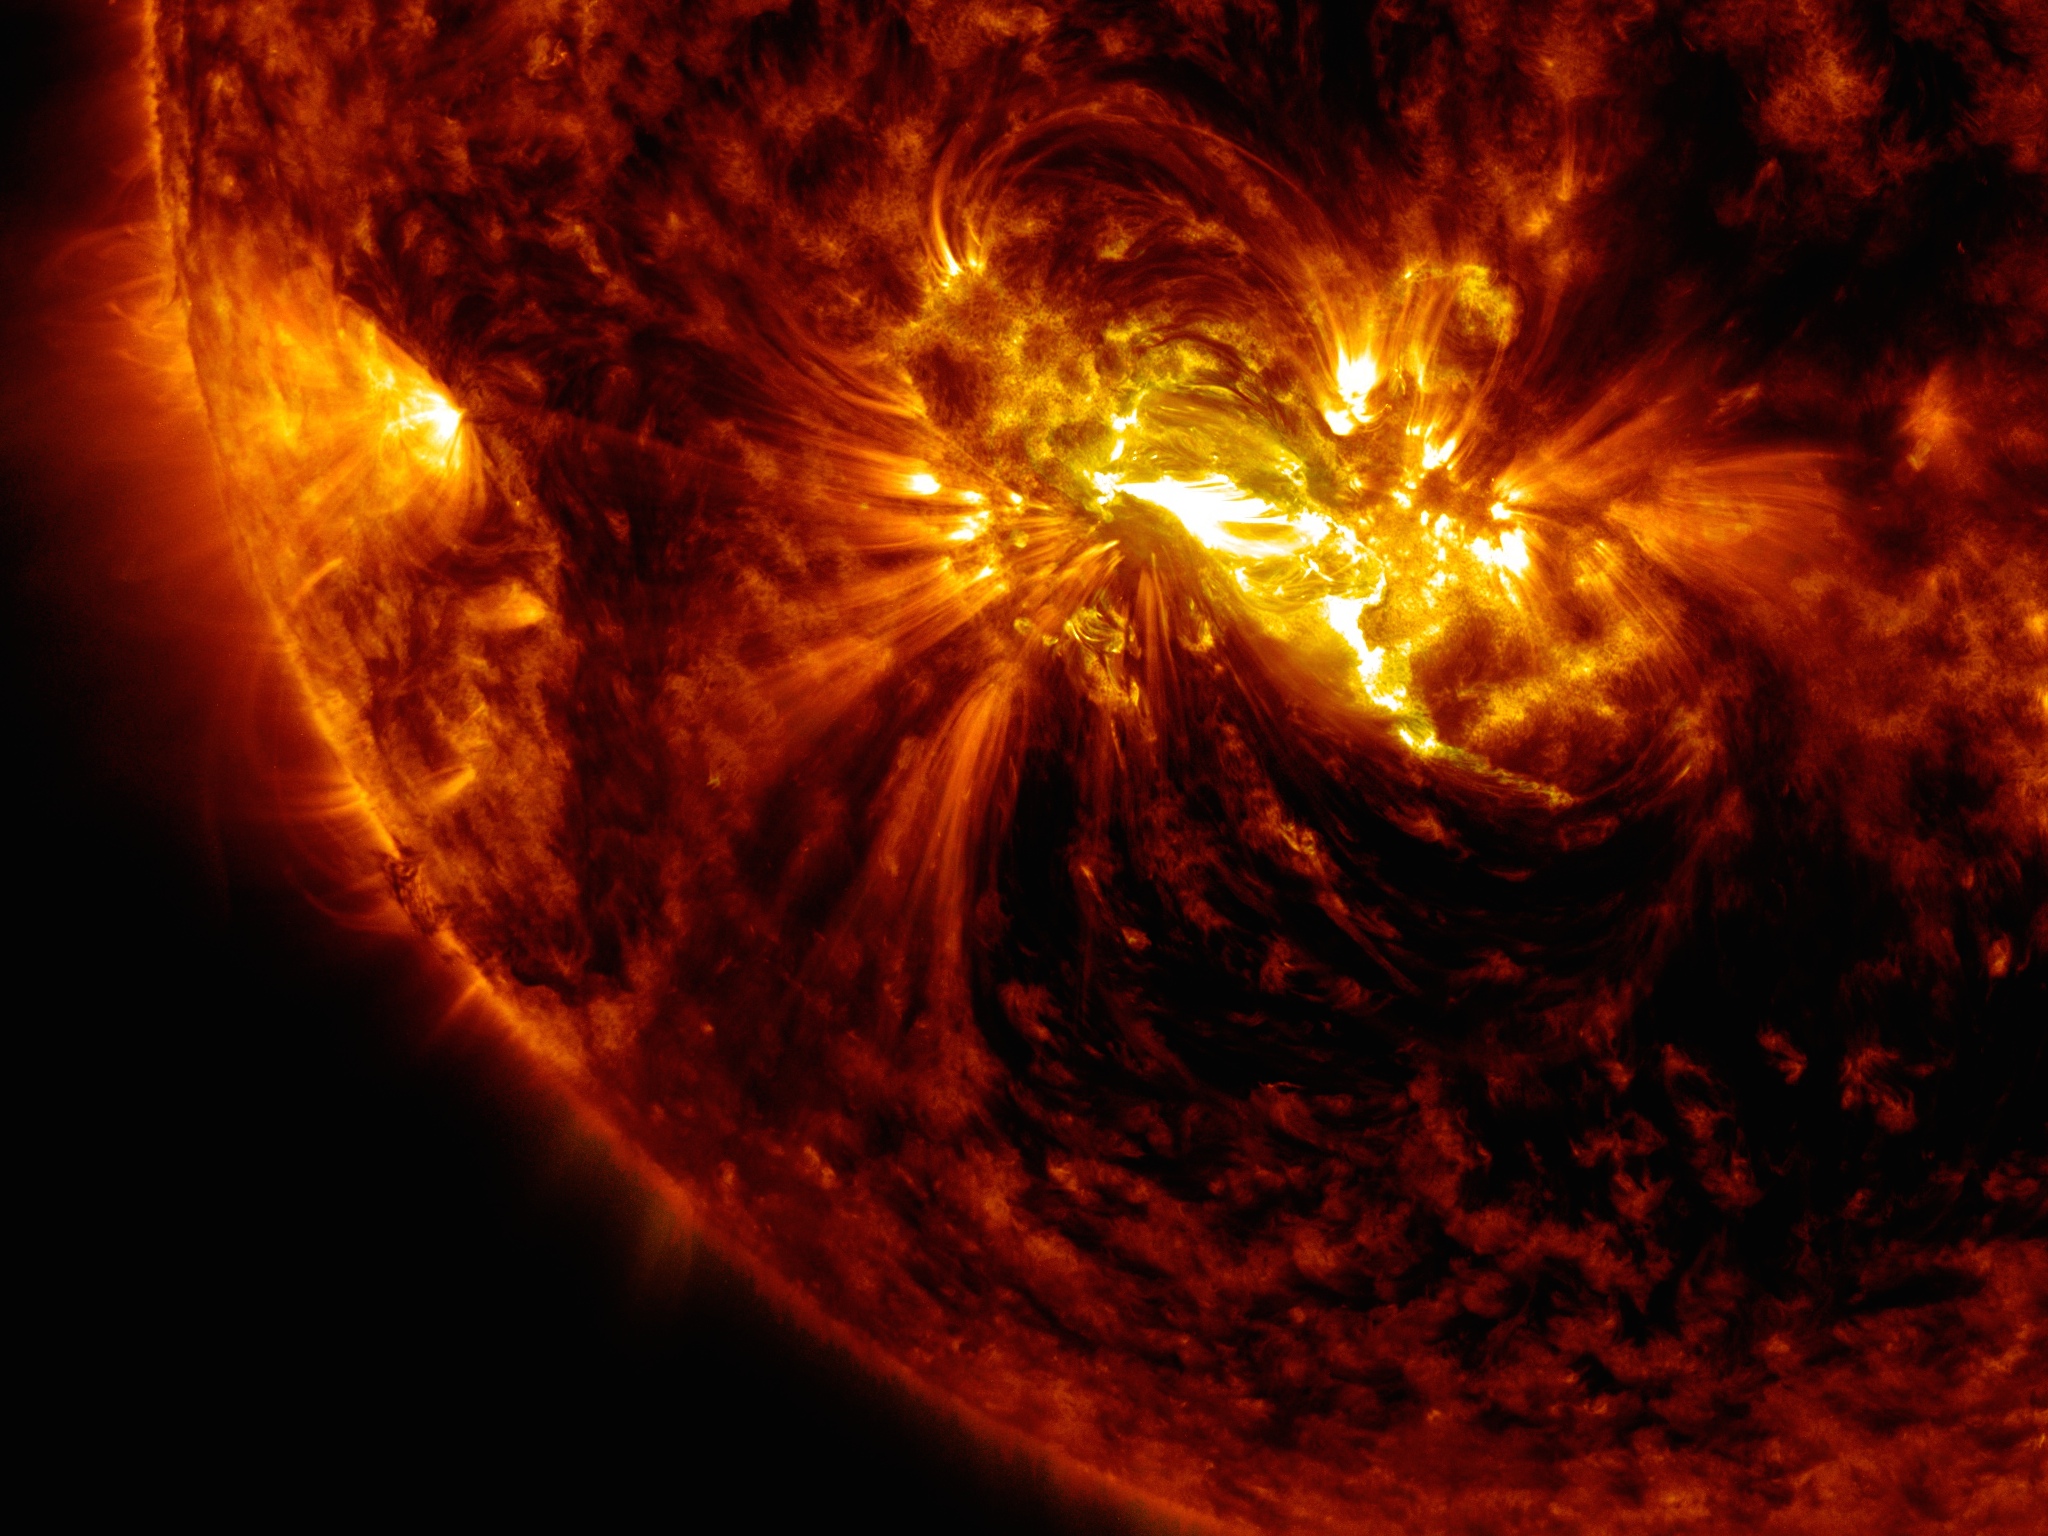 An active region on the sun erupted with a mid-level flare on Oct. 21, 2014, as seen in the bright light of this image captured by NASA's Solar Dynamics Observatory. This image shows extreme ultraviolet light that highlights the hot solar material in the sun's atmosphere. Credit: NASA/GSFC/SDO